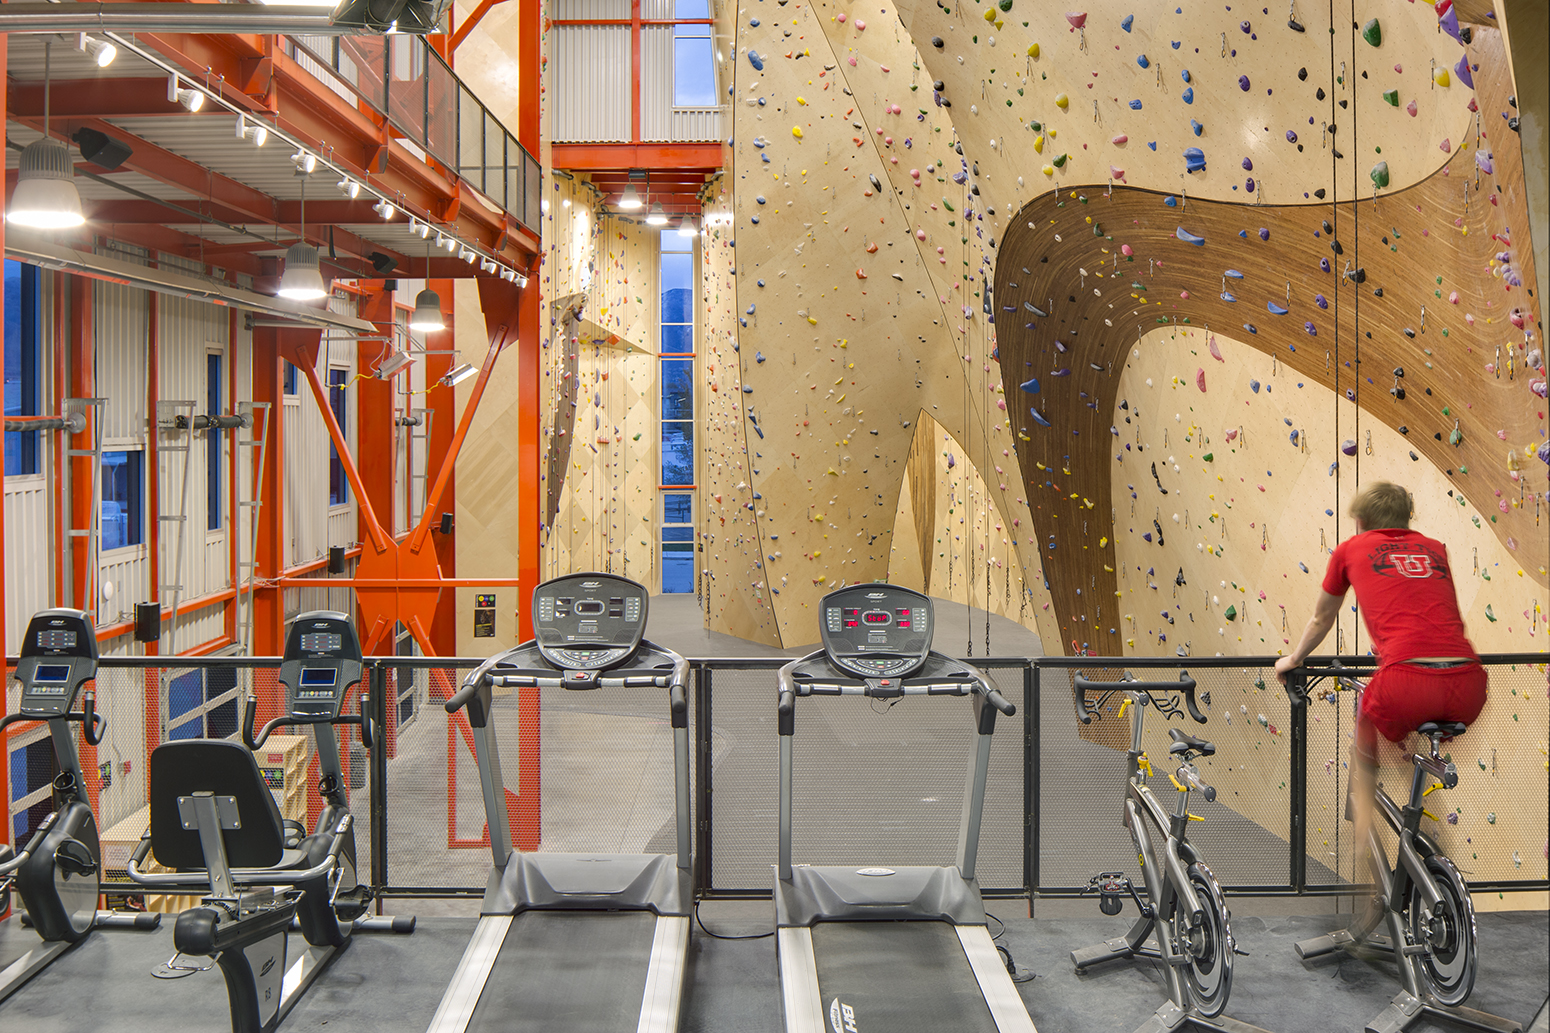 The Front Climbing Gym for MHTN ArchitectsArchitectural Photography by: Paul Richer / RICHER IMAGES